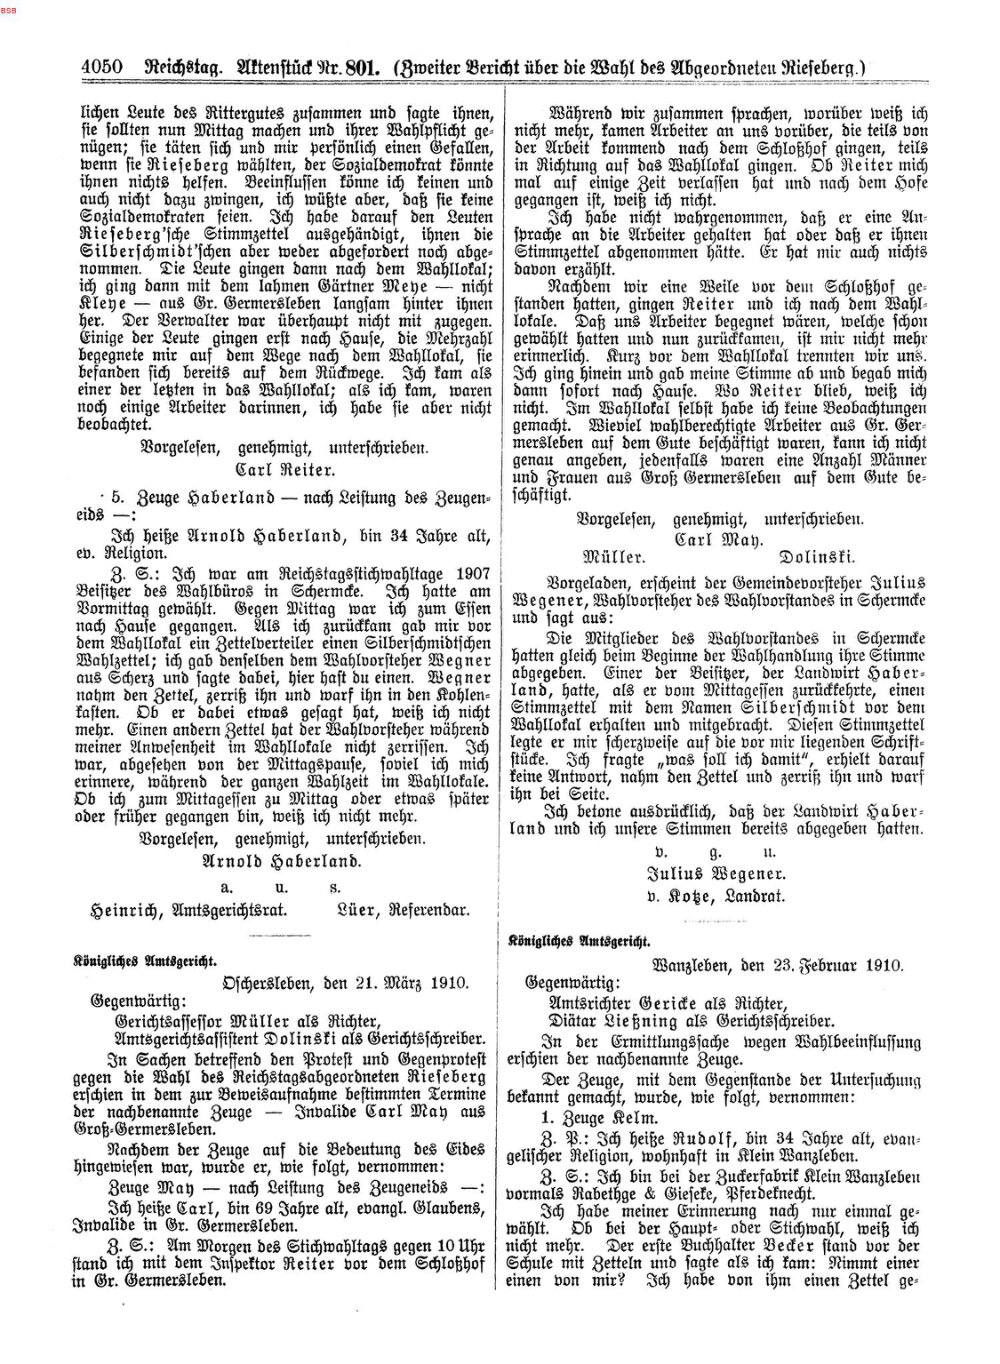 Scan of page 4050